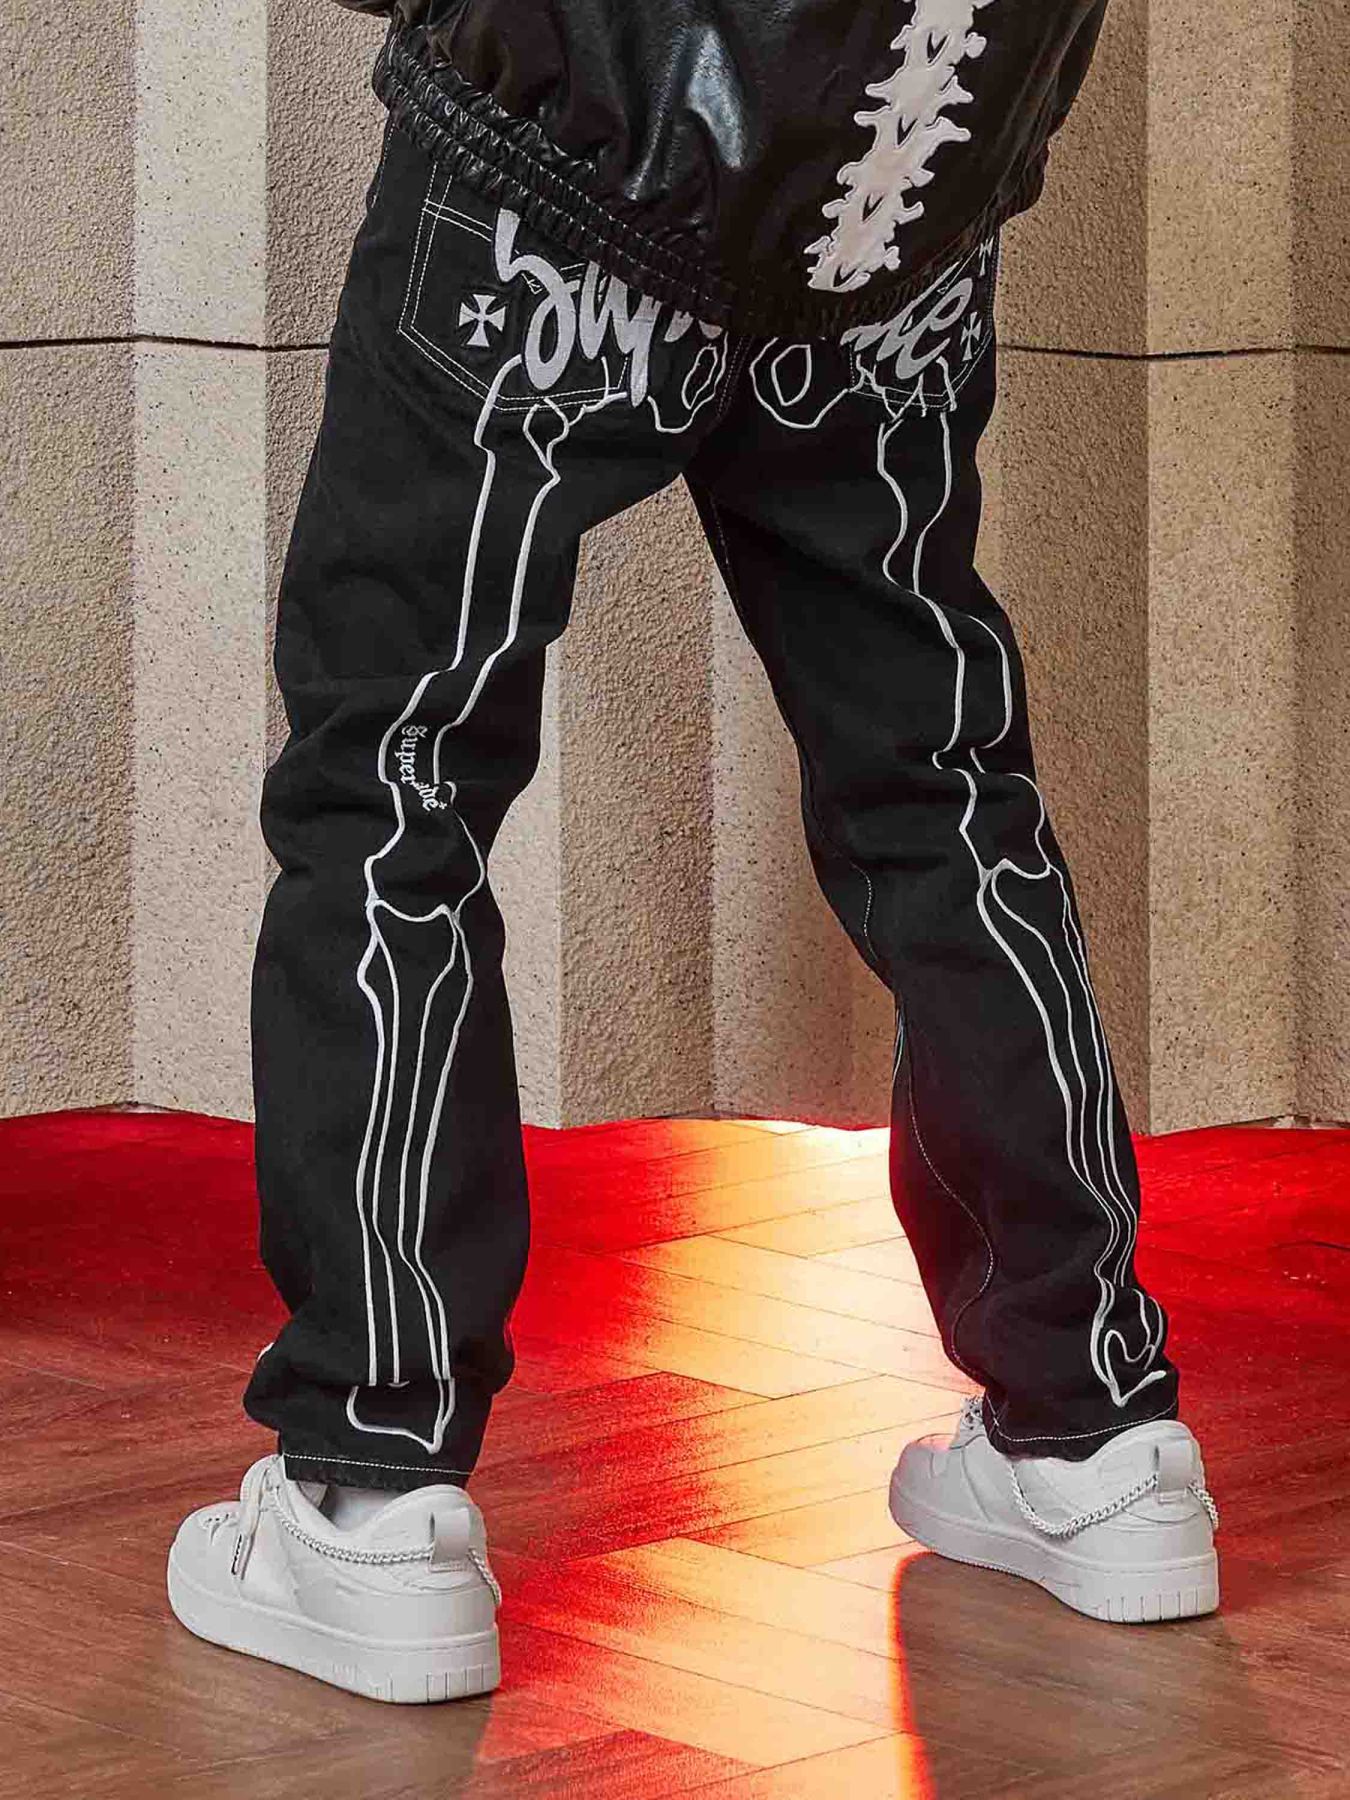 Thesupermade Hip Hop Bones Embroidered Jeans